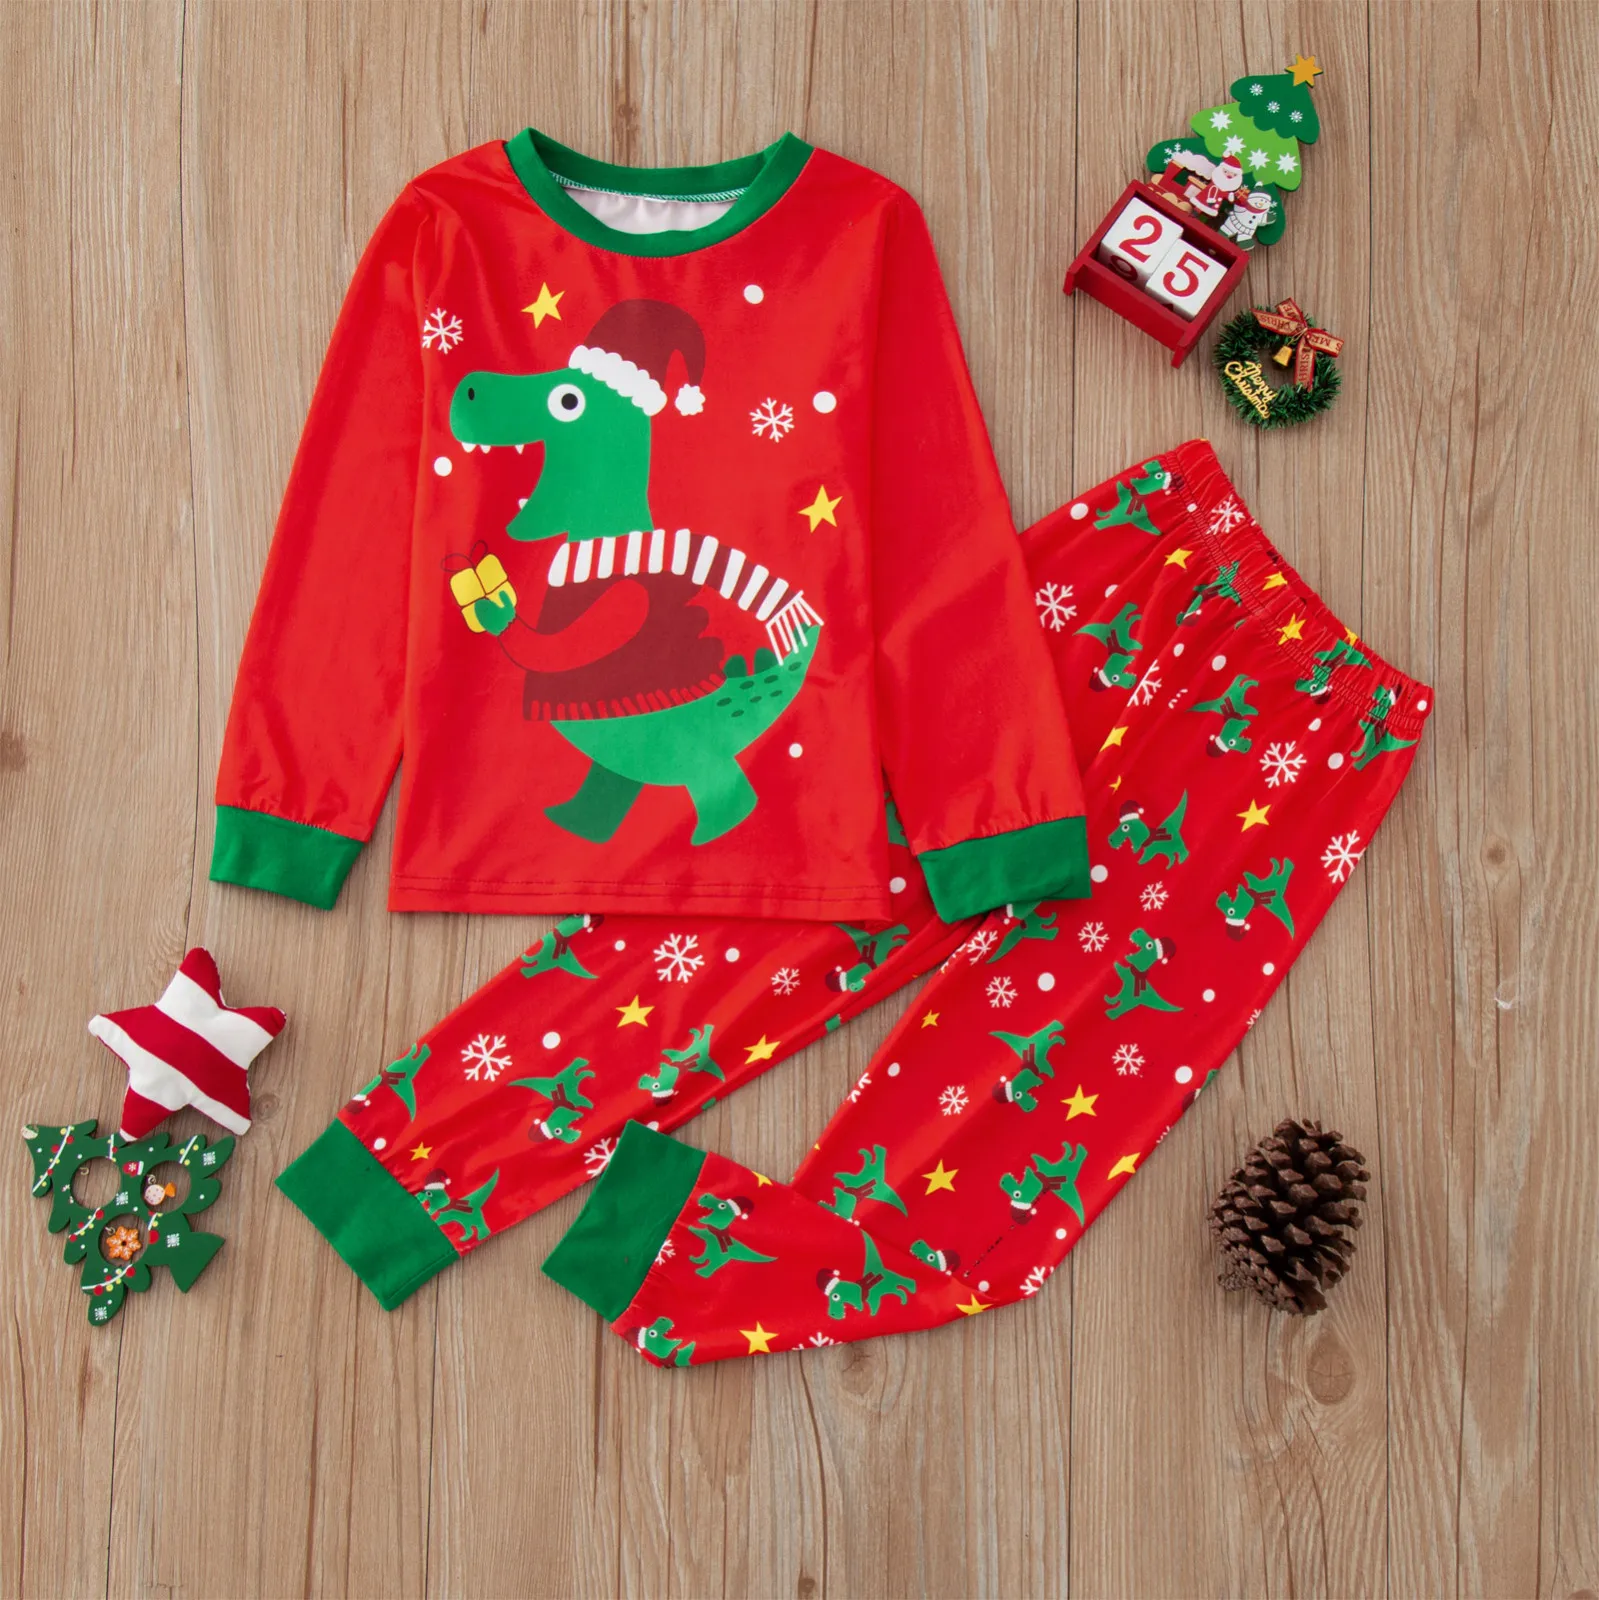 custom pajama sets	 Toddler Baby Kids Boys Warm Pajamas Suit Christmas Pajamas Sleepwear Tops Pants Outfits Suit Casual Clothes Flannel Pants Youth cotton nightgowns